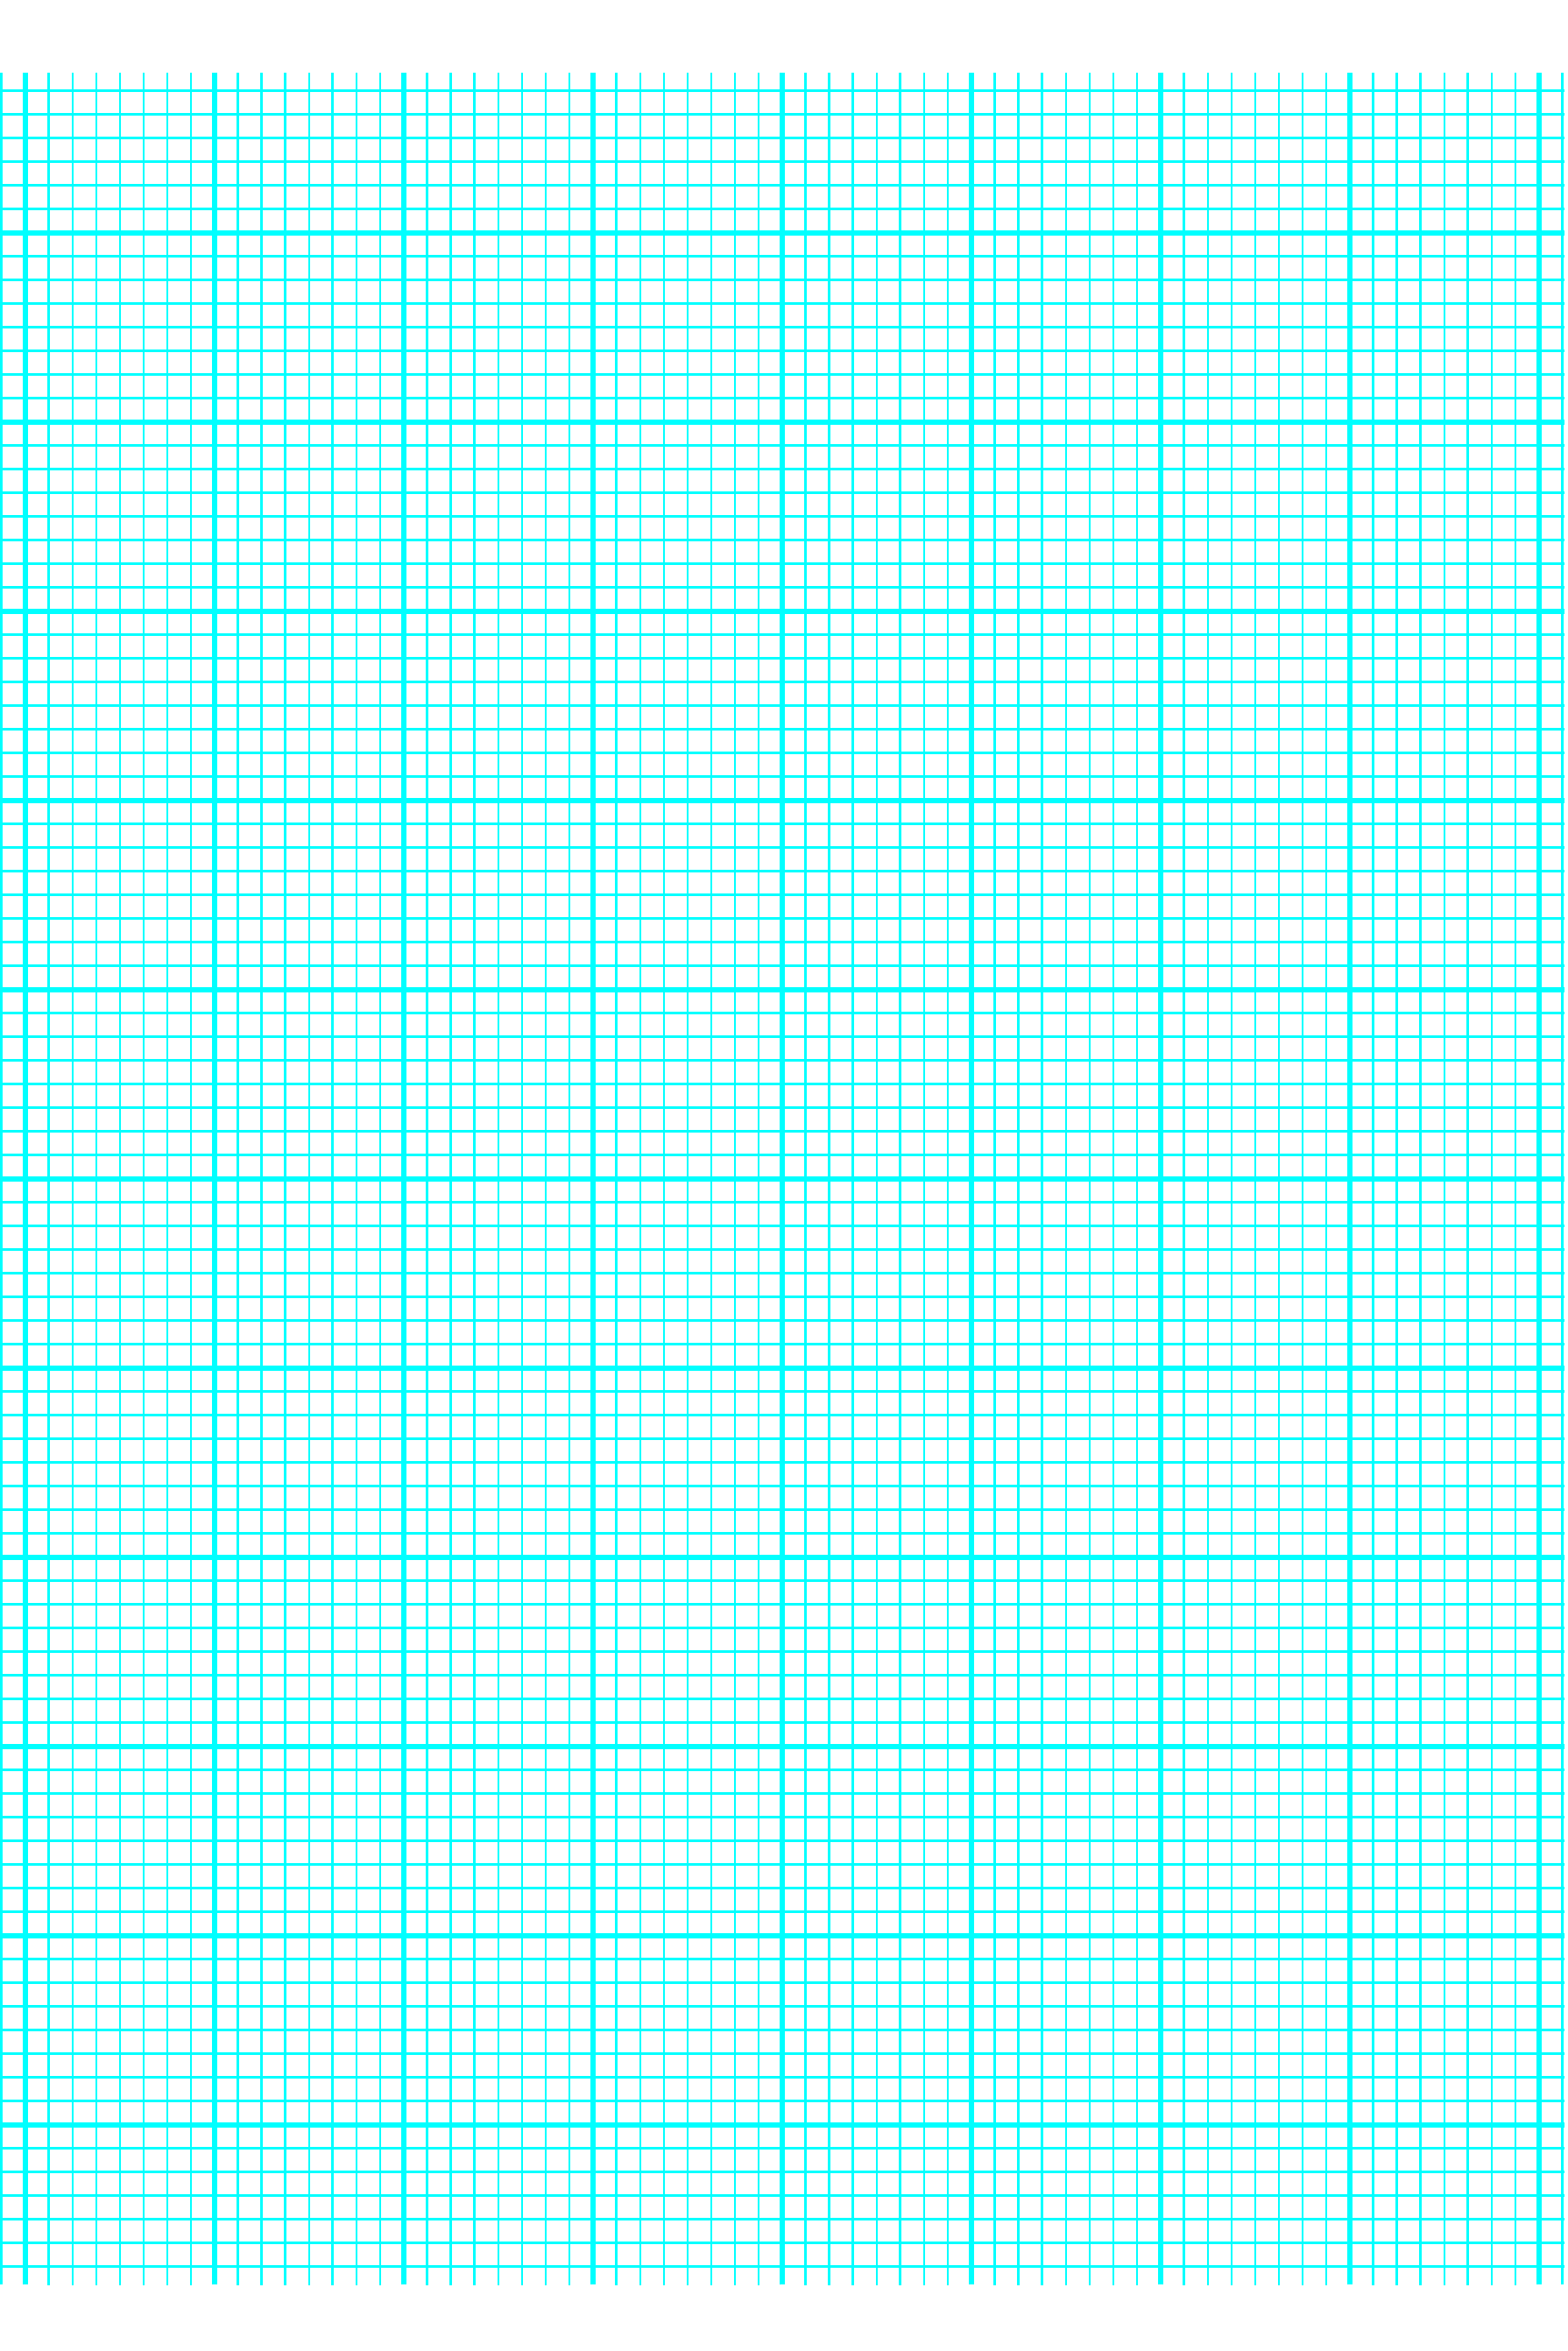 8 Lines Per Inch Graph Paper On A4 Sized Paper Heavy Free Download